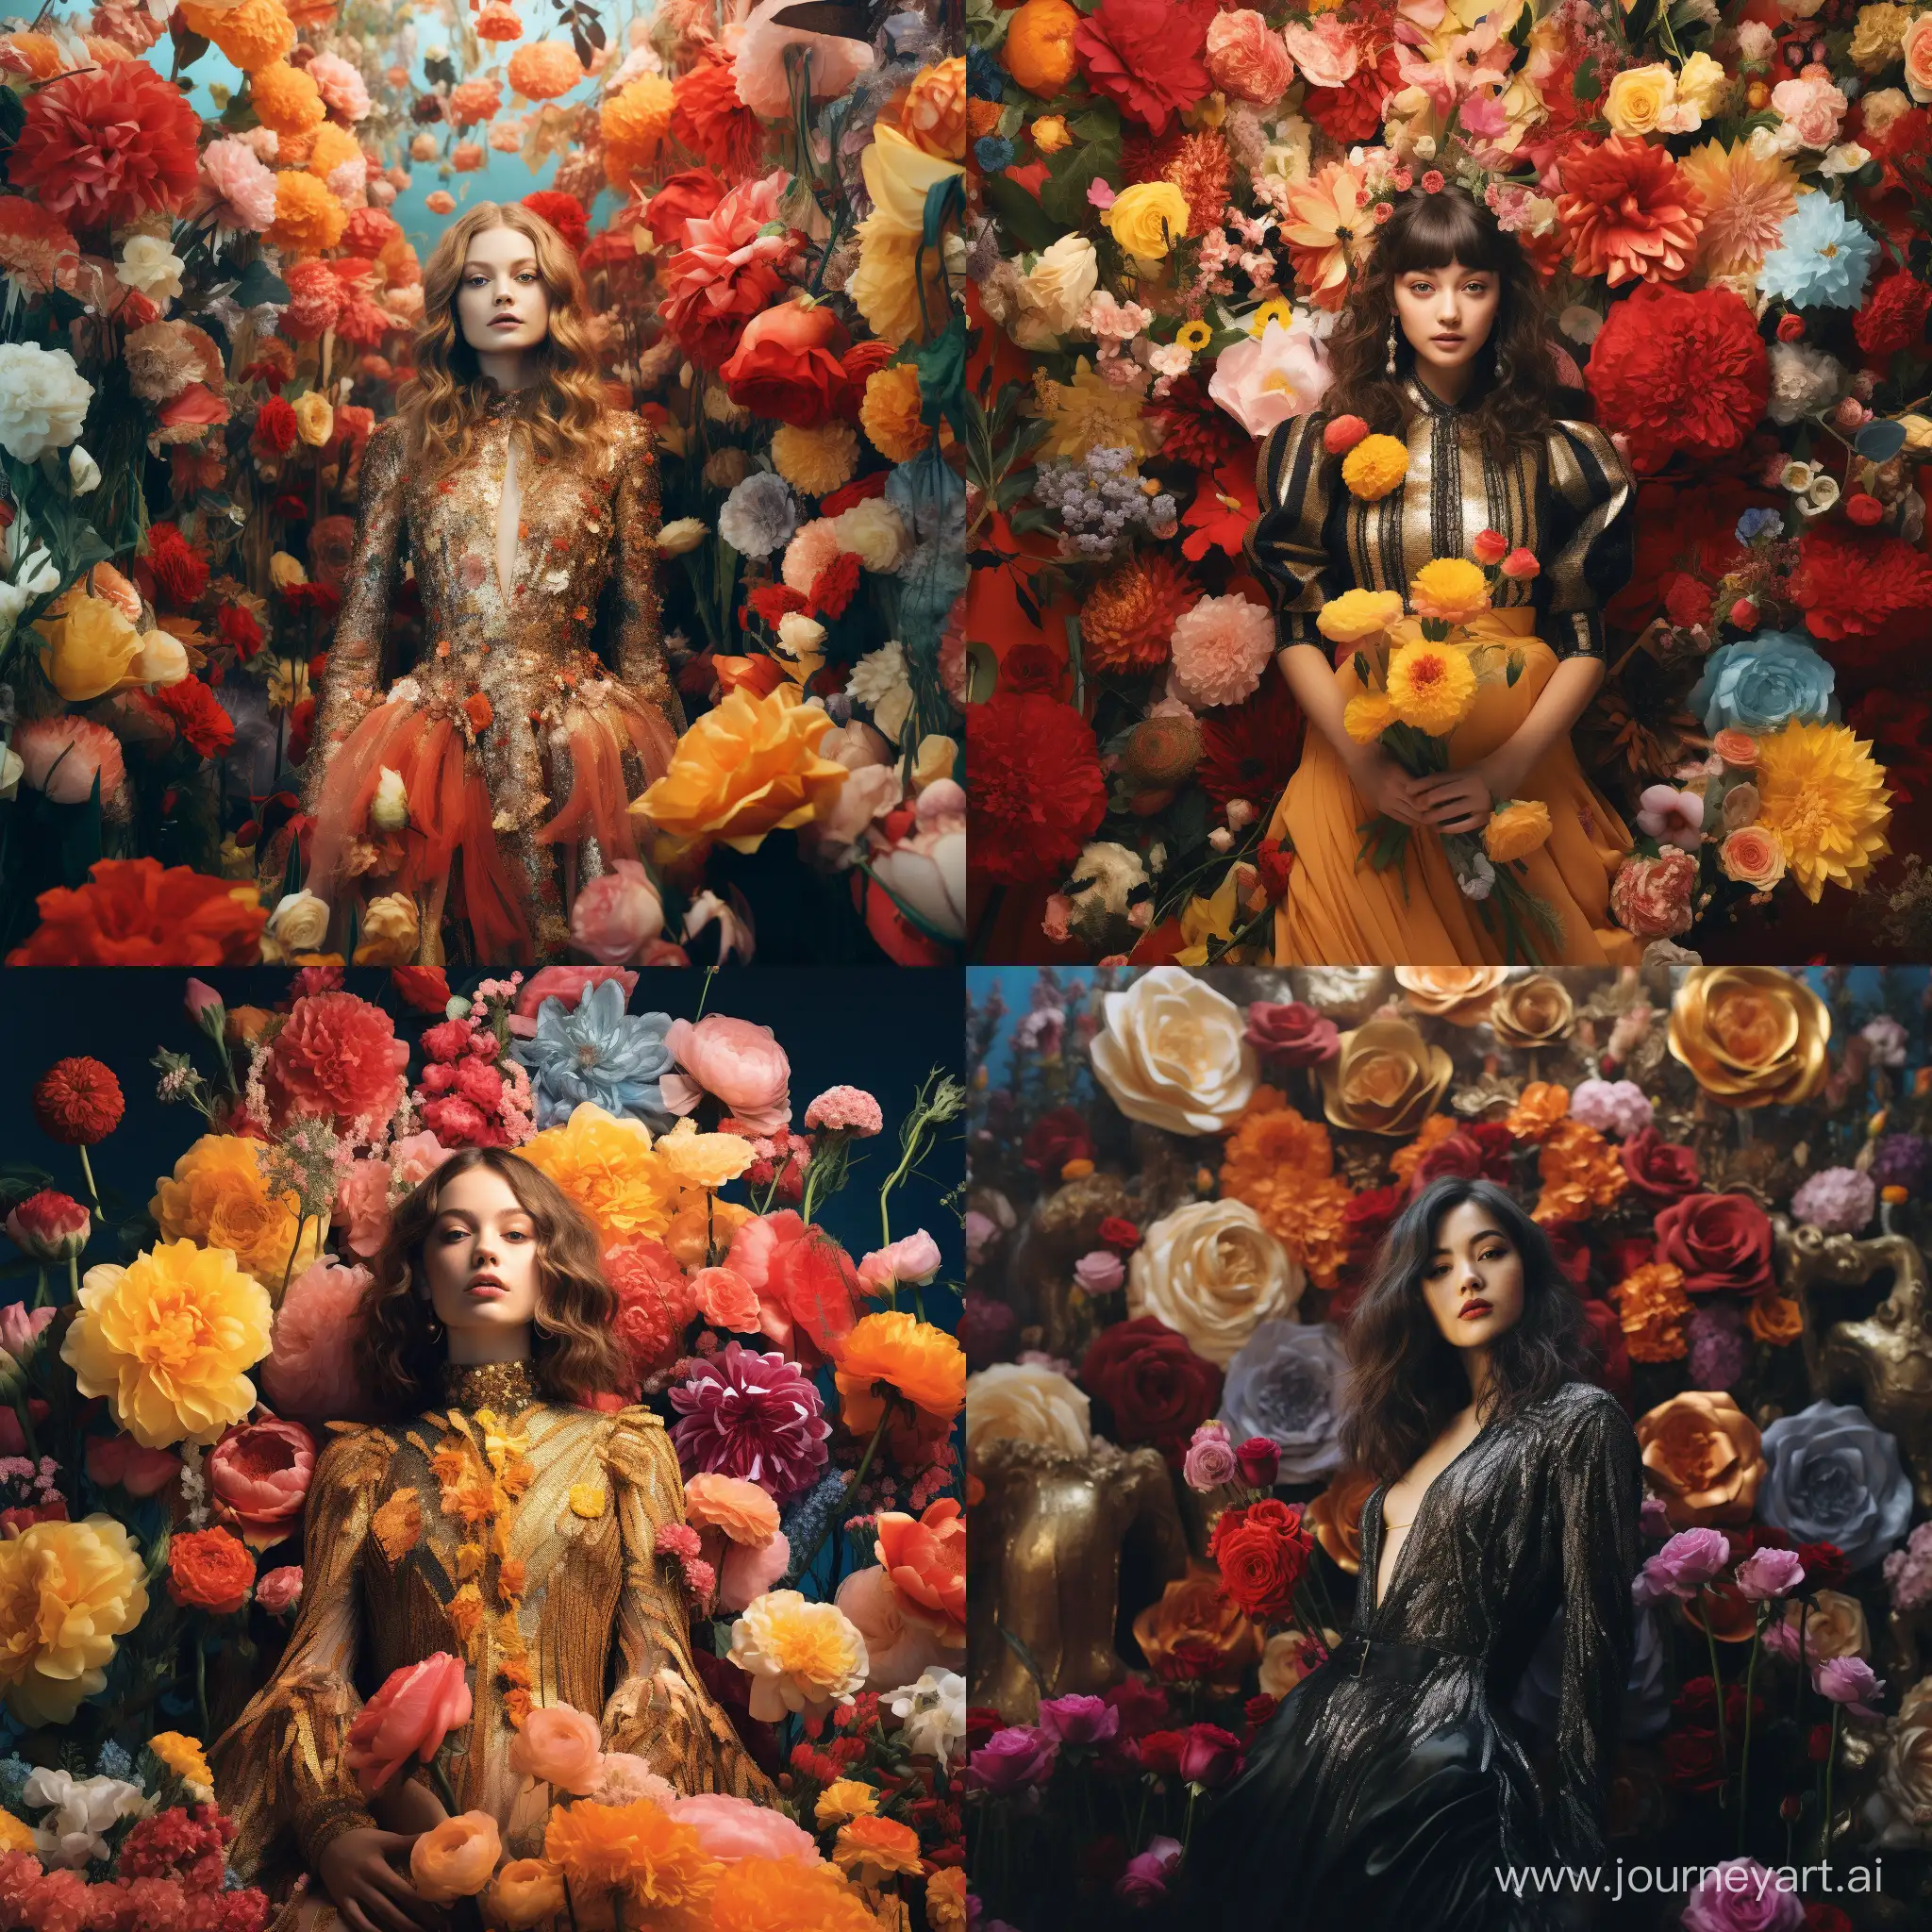 Extravagant-Floral-Elegance-Vibrant-Collage-Inspired-by-Bella-Kotak-and-Album-Covers